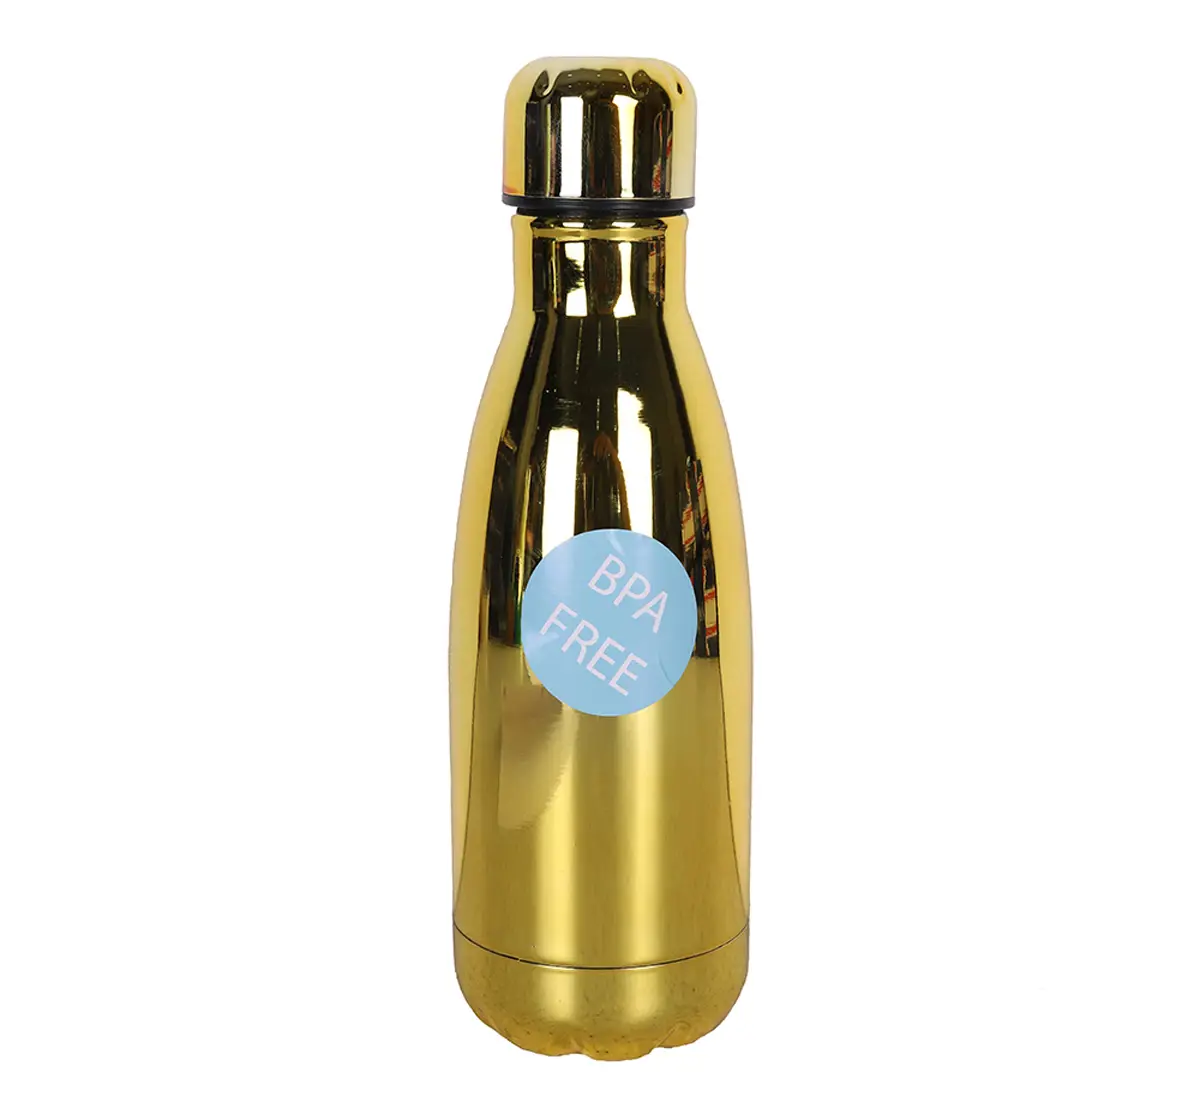 Stainless Steel Insulated Water Bottle by Hamster London for Kids, Gold, Non-Toxic, BPA Free, 350ml, 5Y+